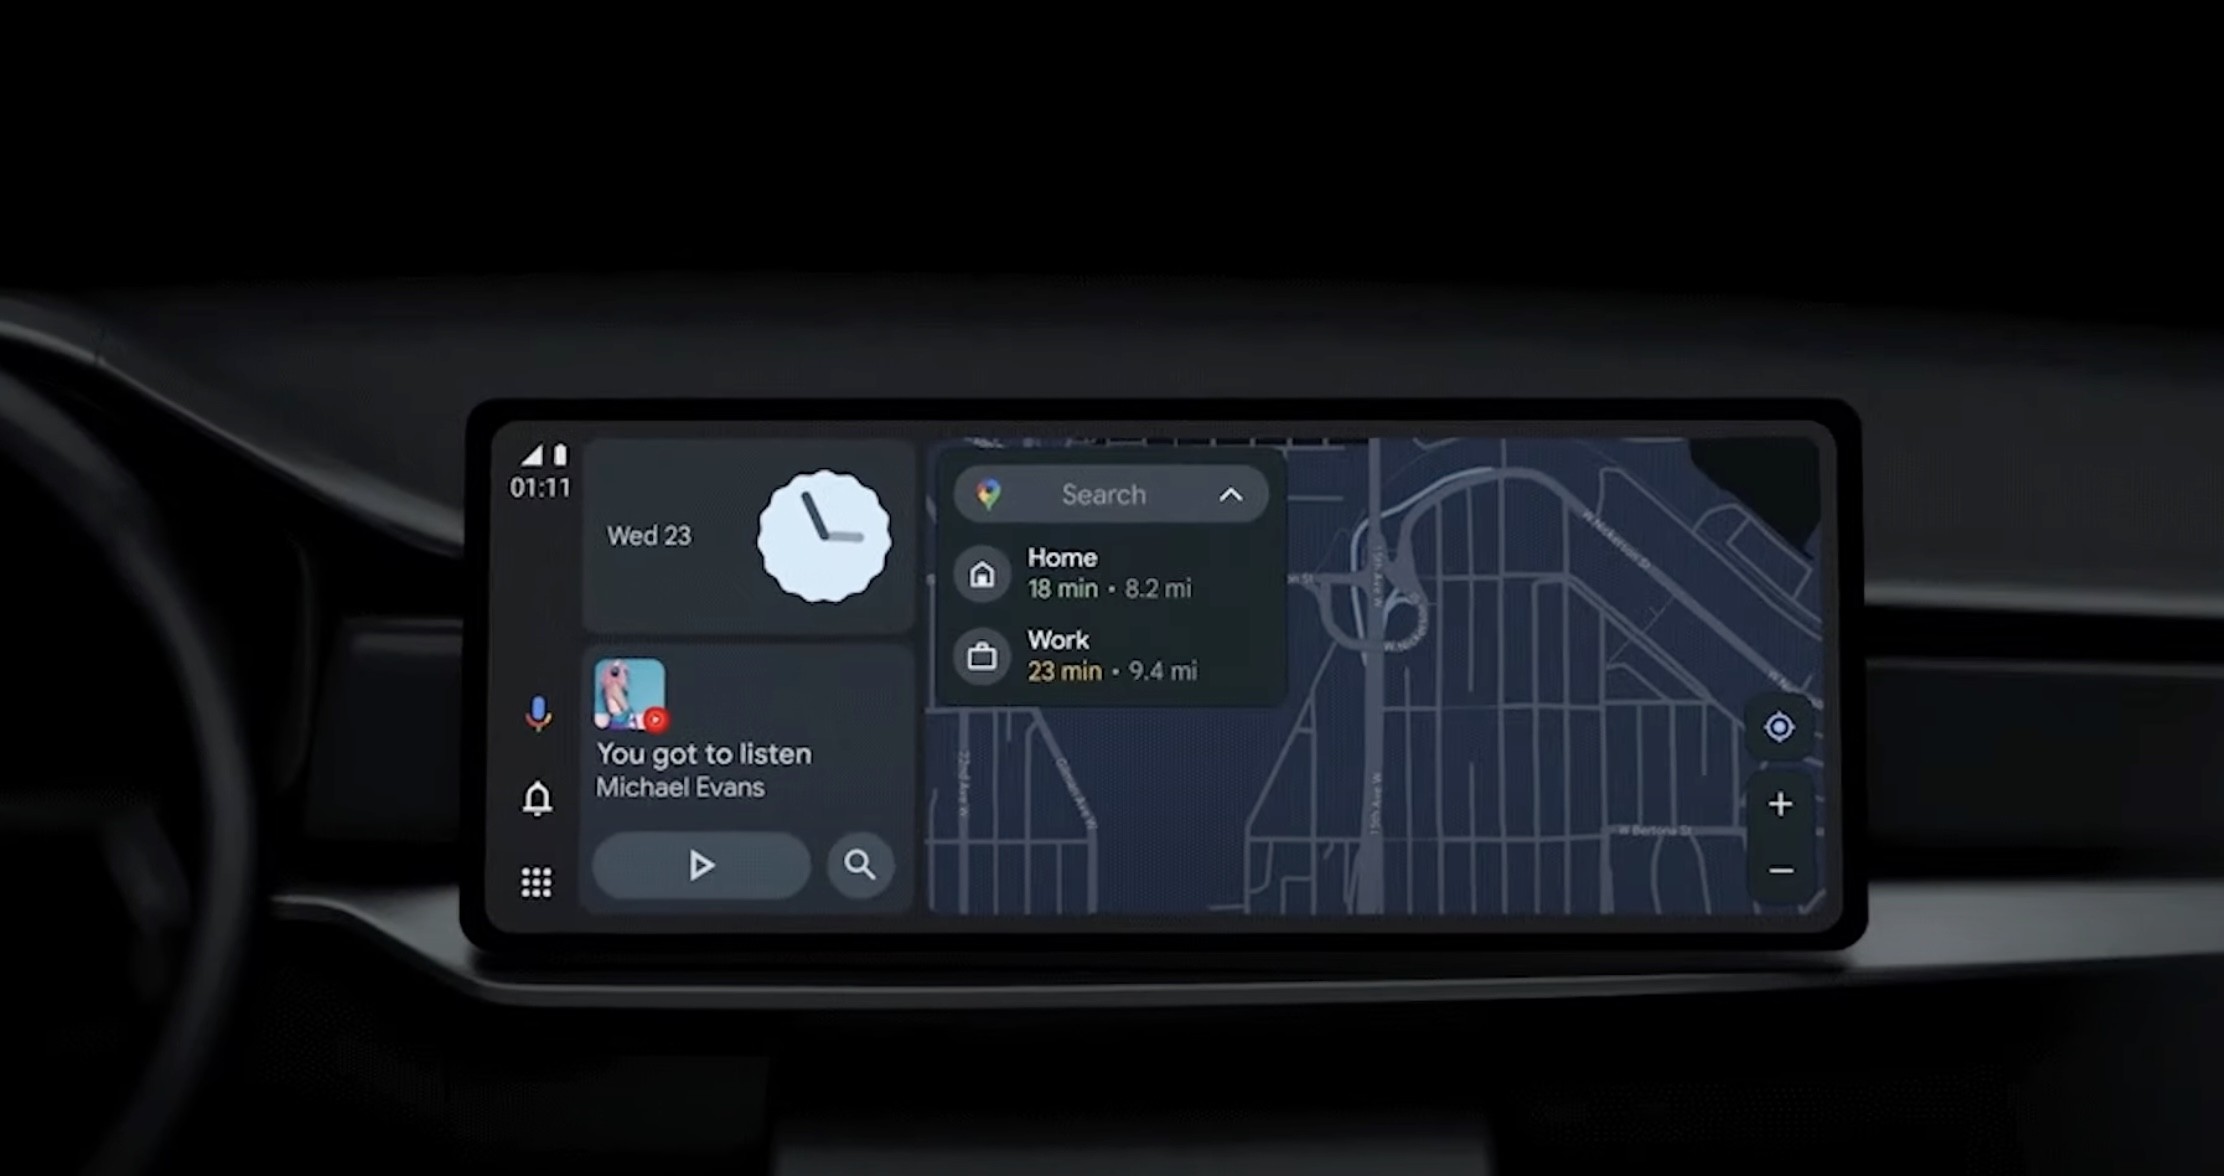 Dreaming of wireless Android Auto? Now is the time to get this